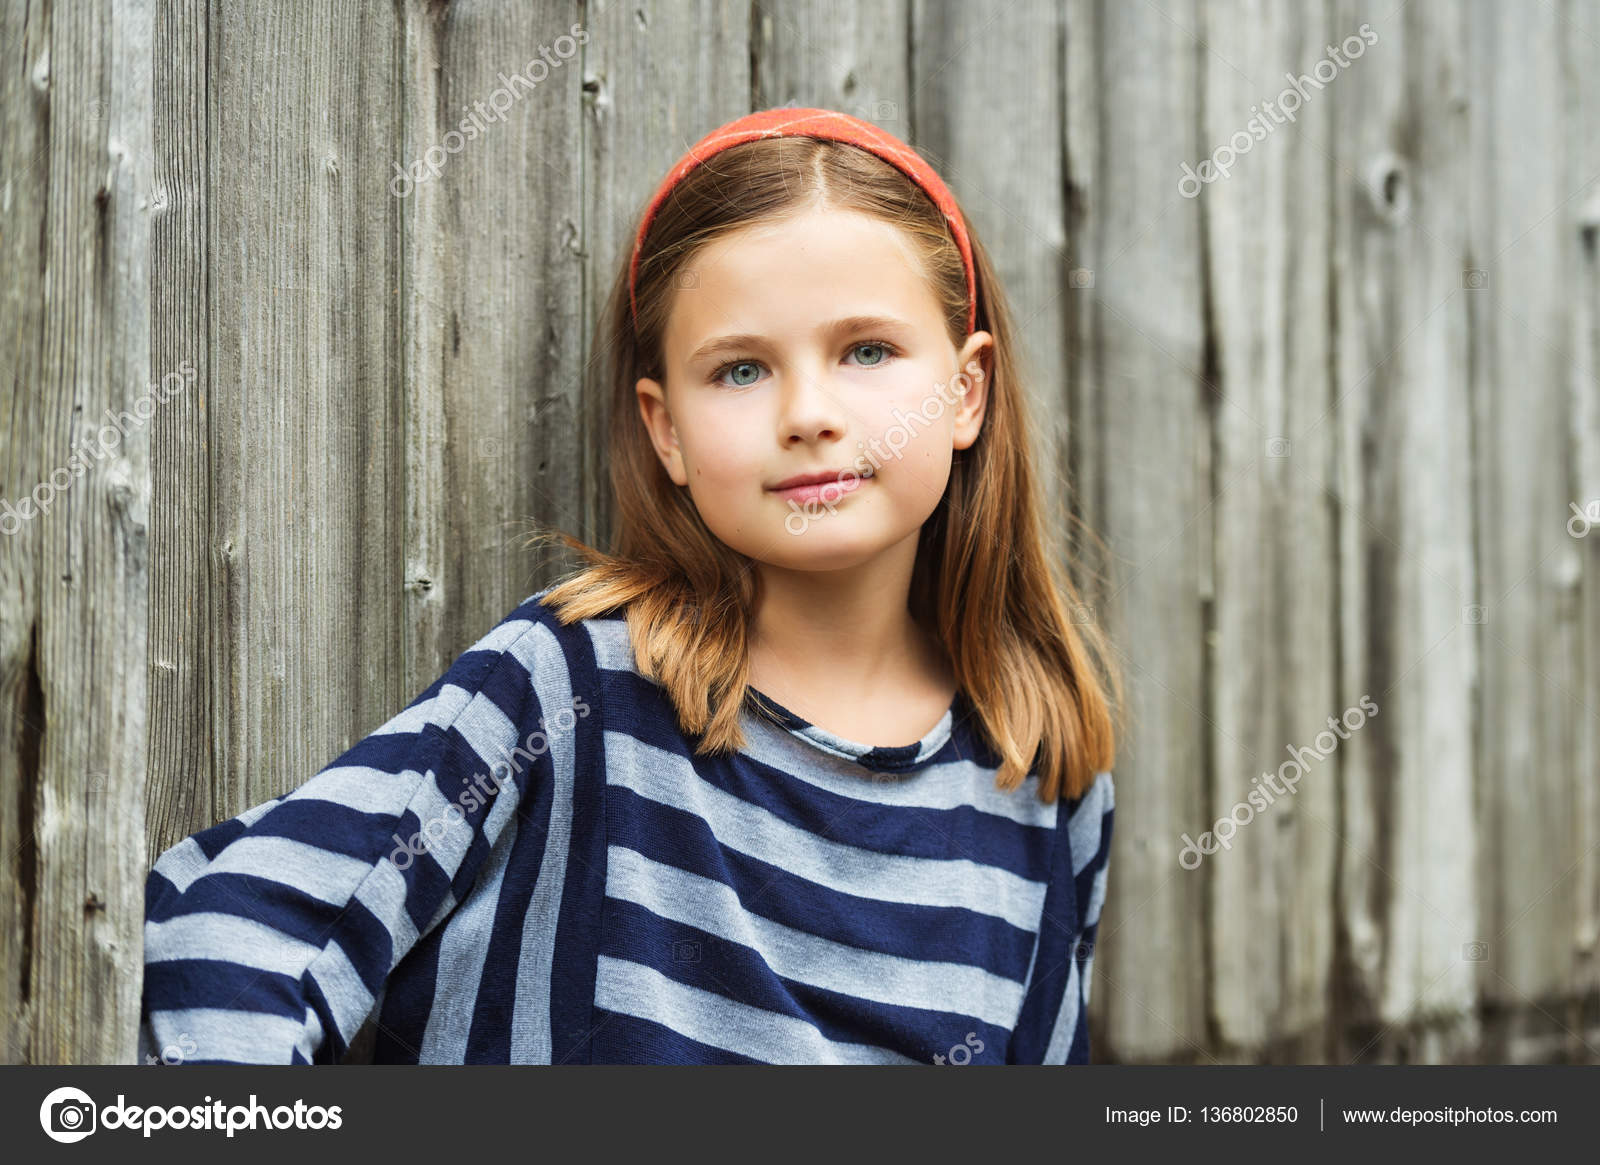 Outdoor portrait of cute little 8-9 year old girl with brown hair